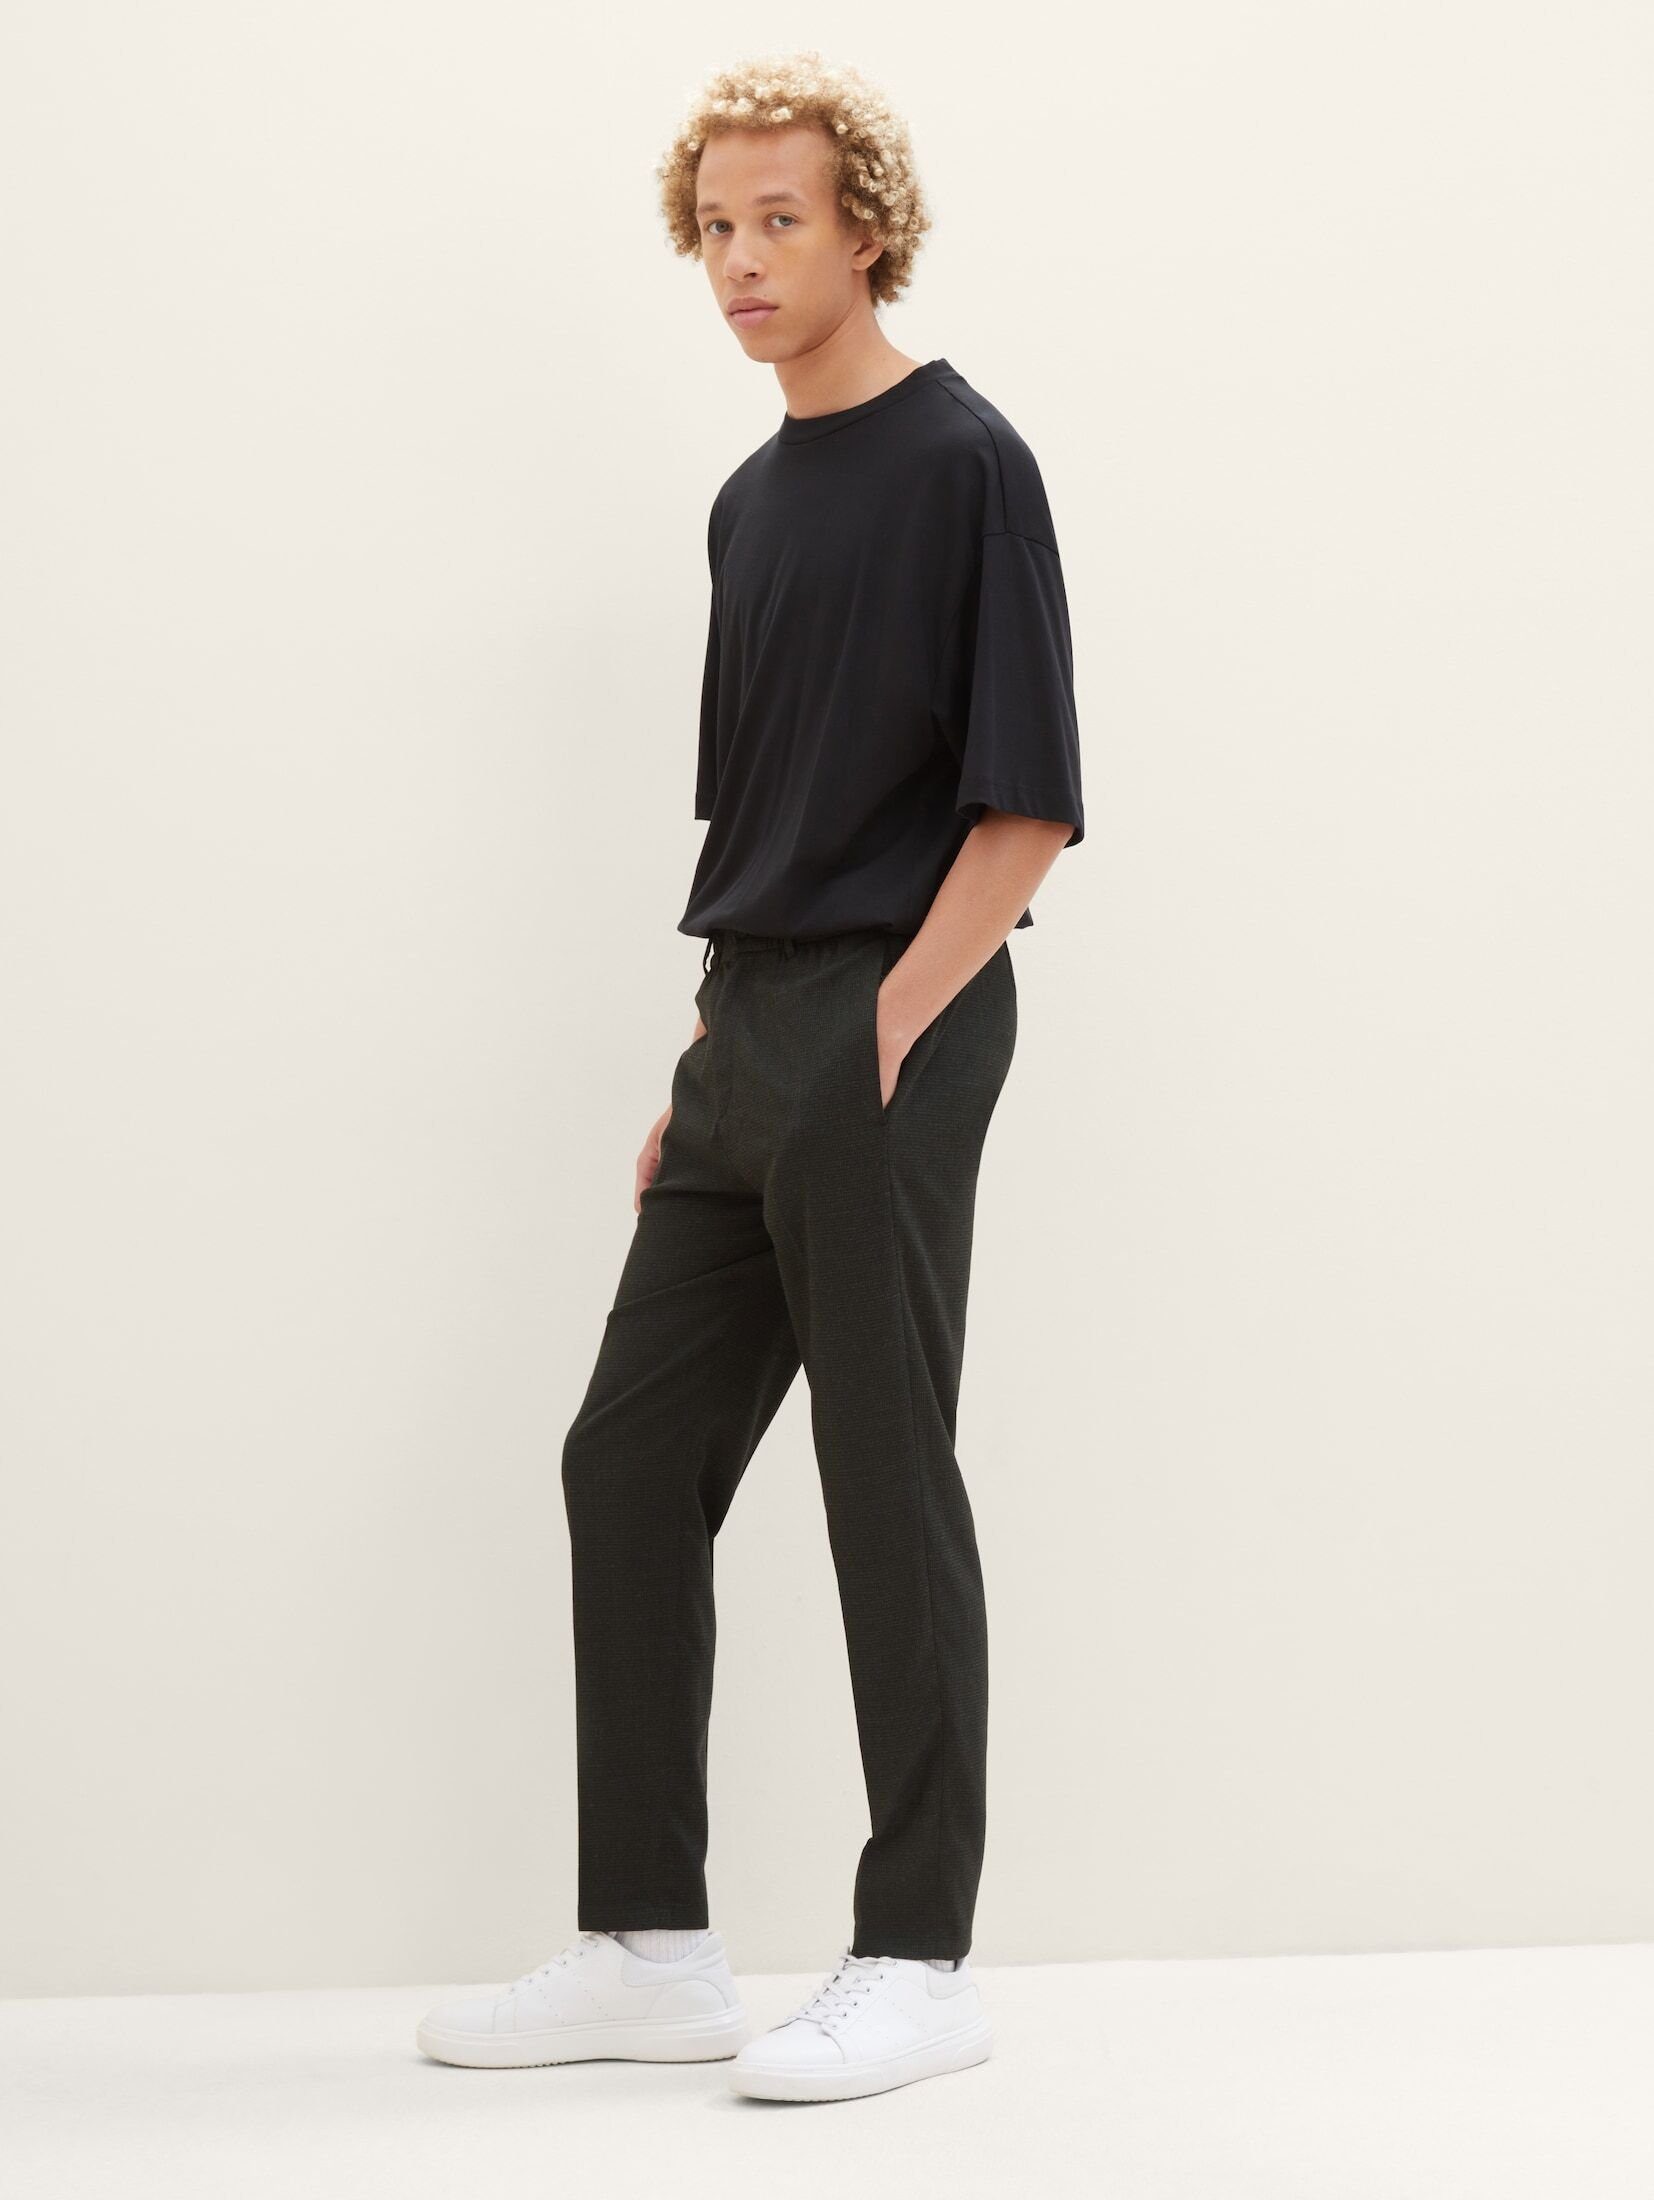 Relaxed Chinohose Tapered black Denim TAILOR Chino TOM houndstooth